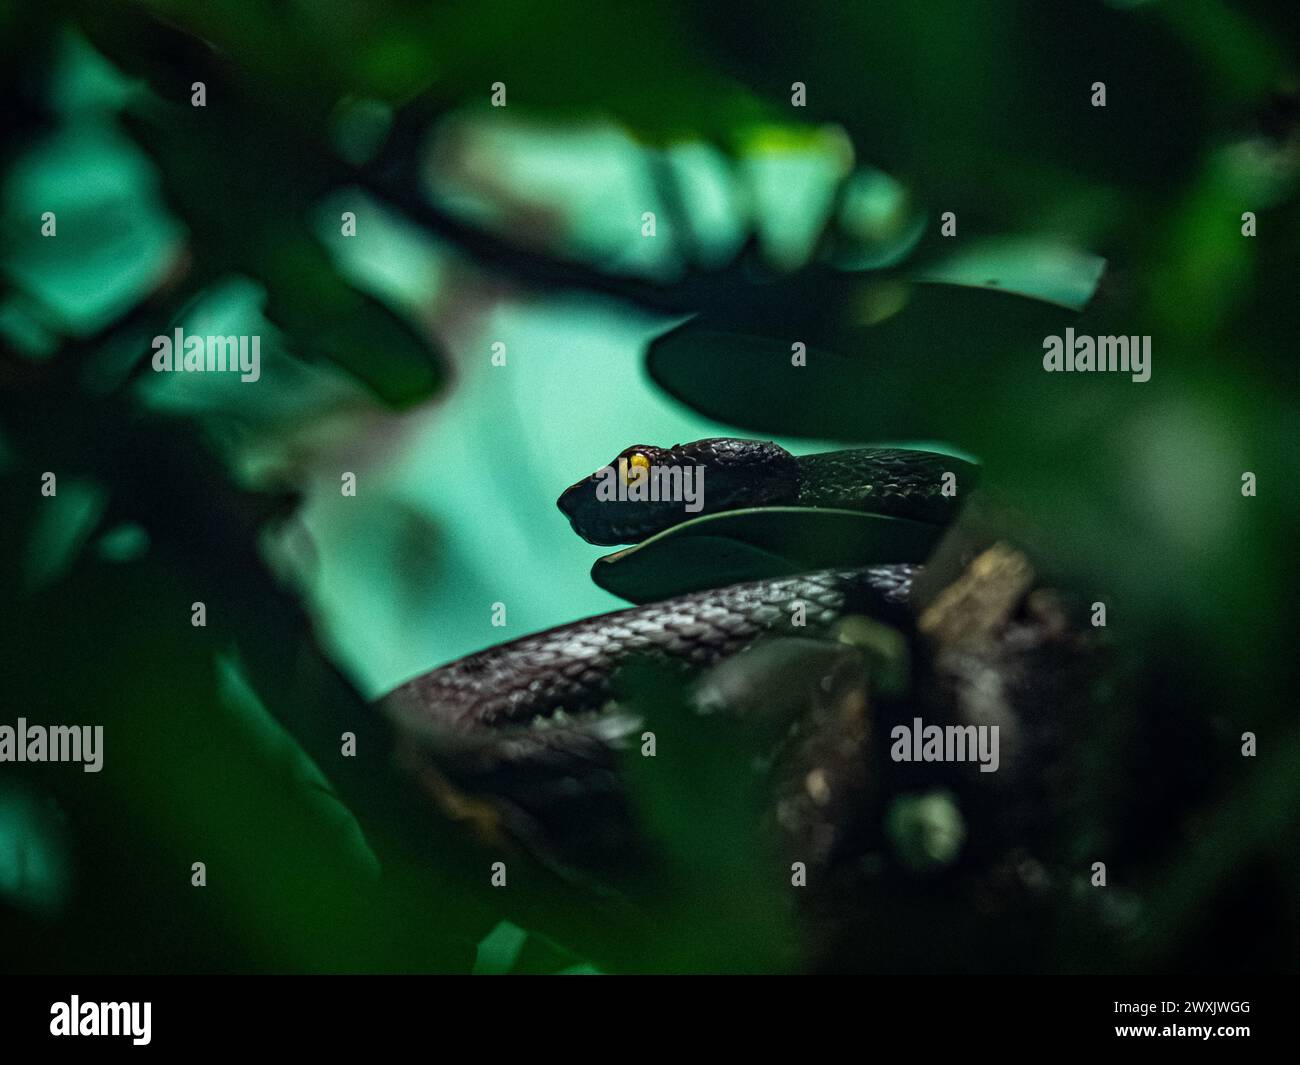 A snake resting among green tree branches Stock Photo